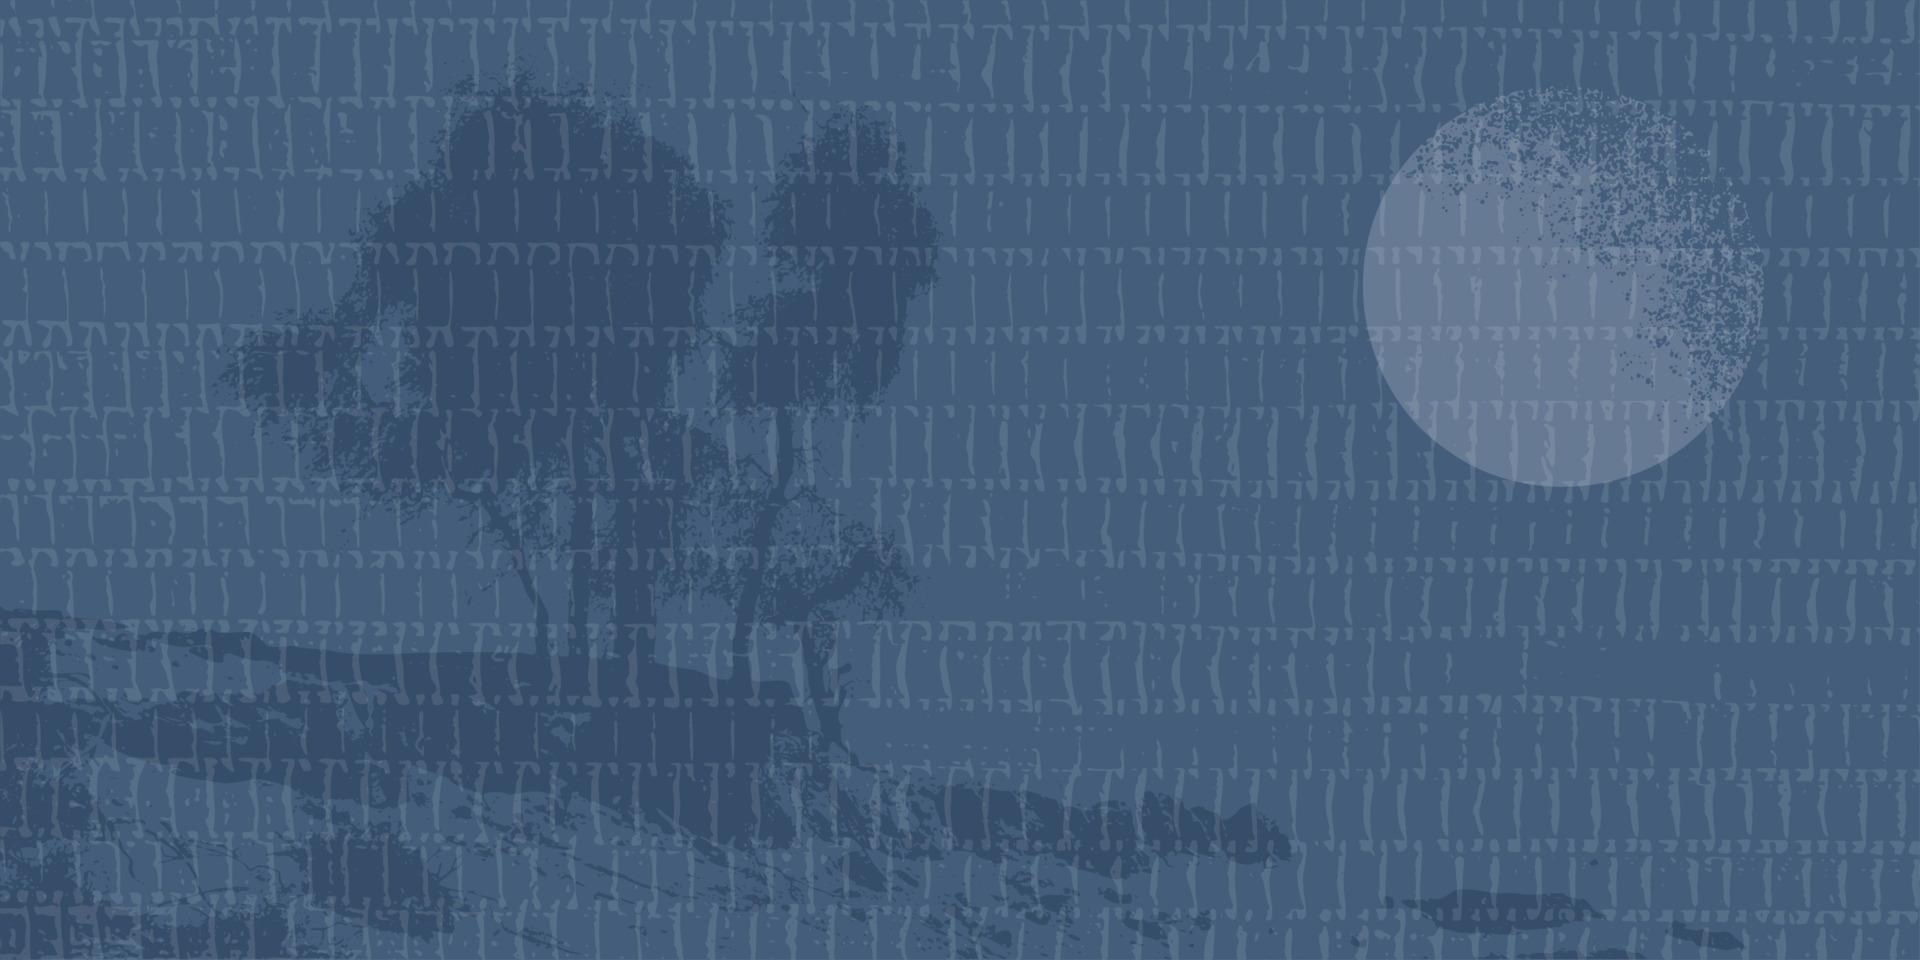 Futuristic background with a matting or burlap texture in shades of blue with the moon and the trees of the Tenere desert. Vector illustration.